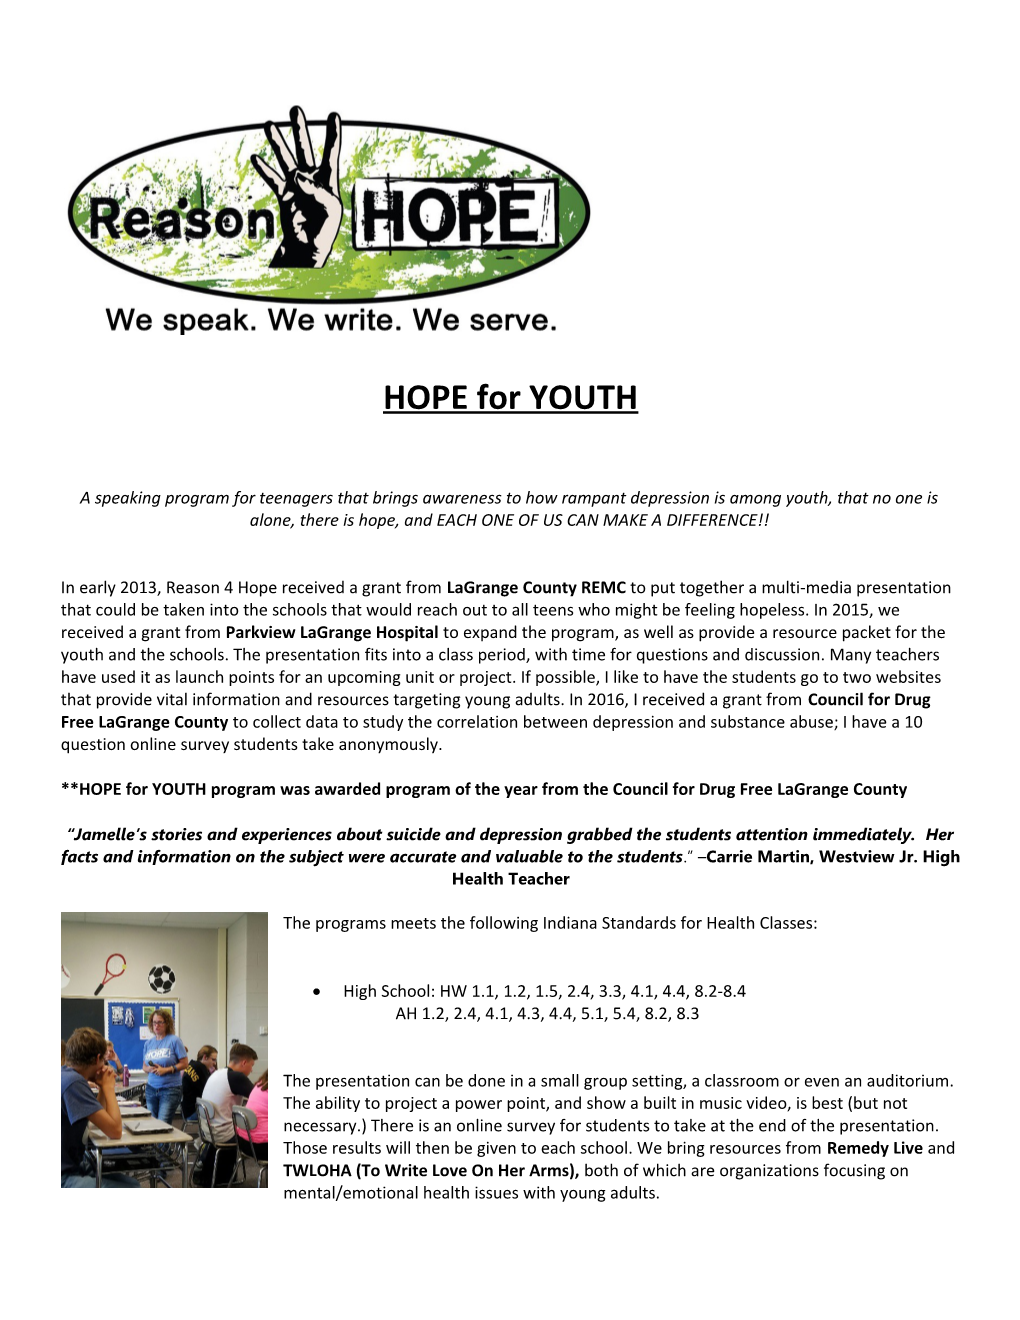 HOPE for YOUTH